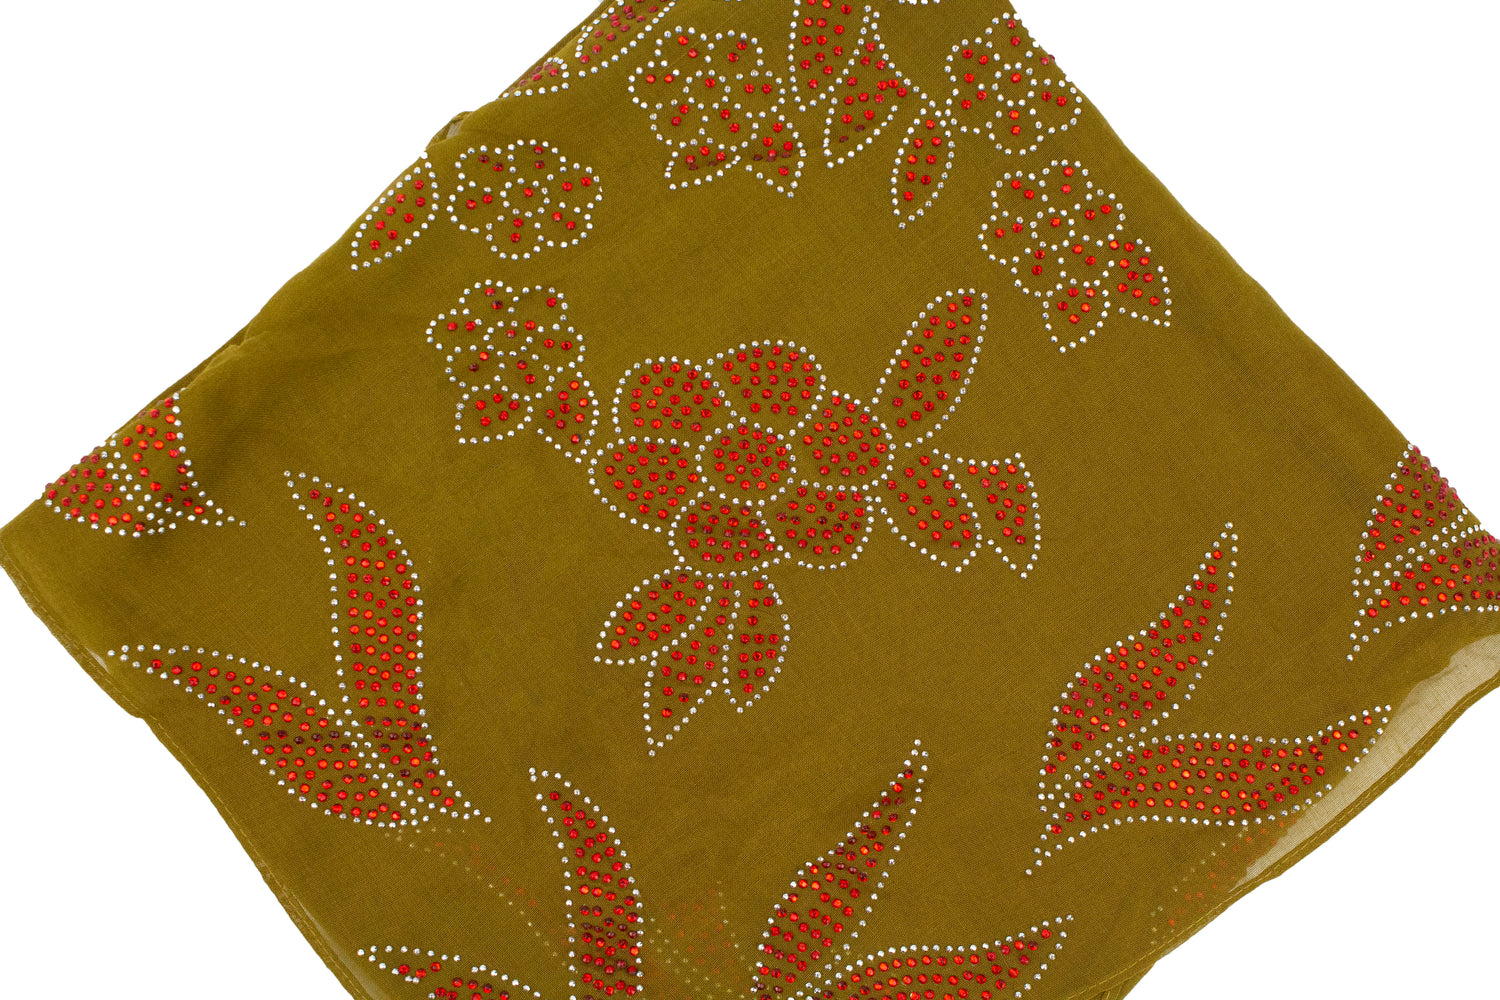 olive square hijab with red jewels in a floral pattern